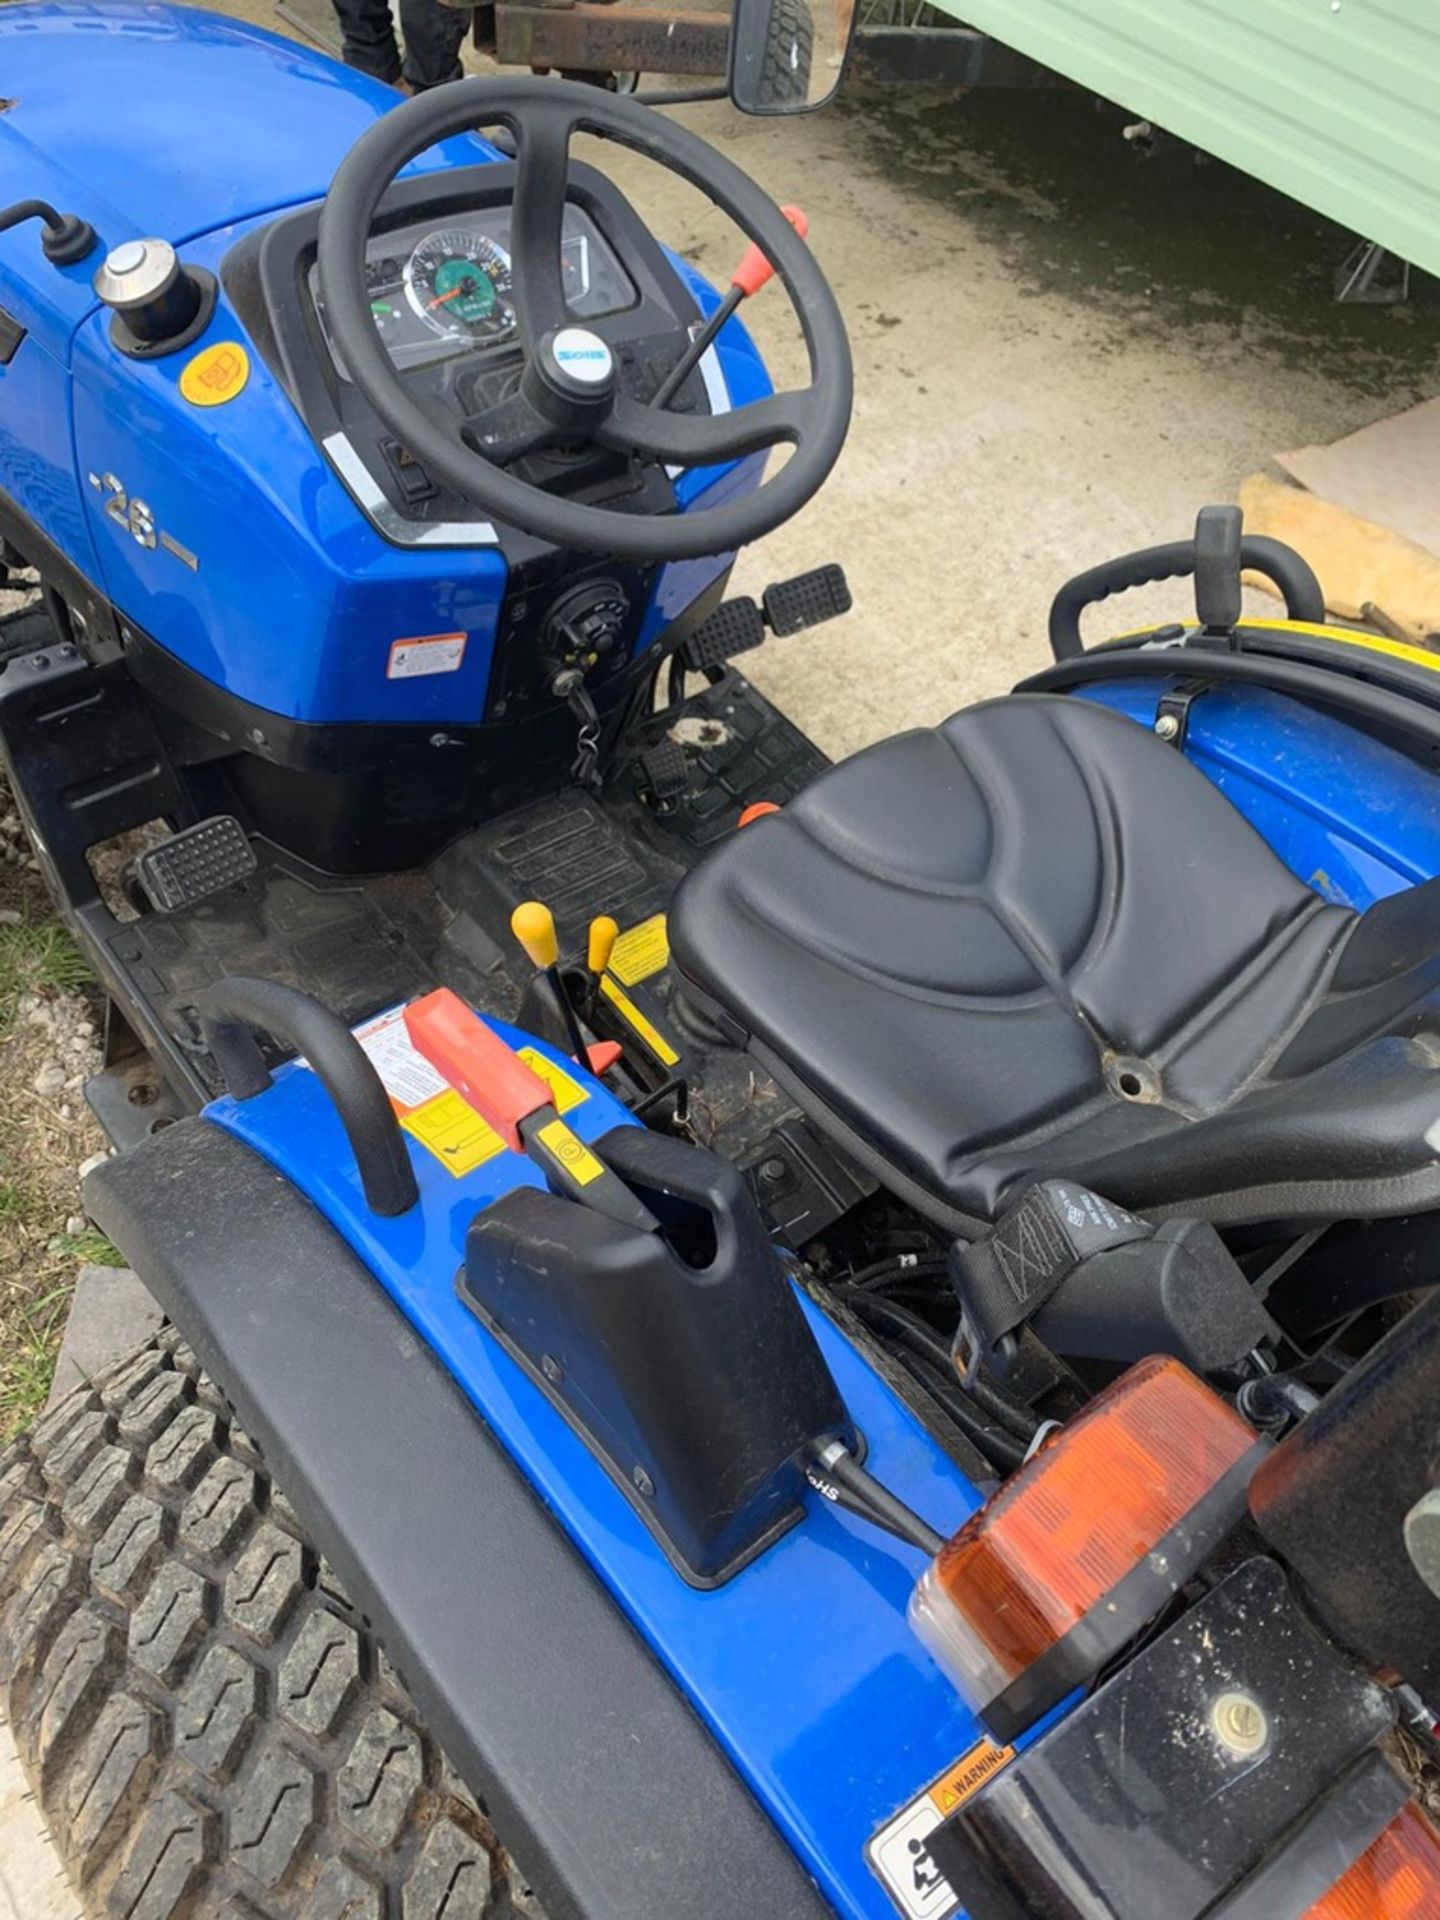 2018 Solis 26 Compact Tractor (53 Hours) on Grassland Tyres and Folding Roll Bar - Bild 3 aus 7